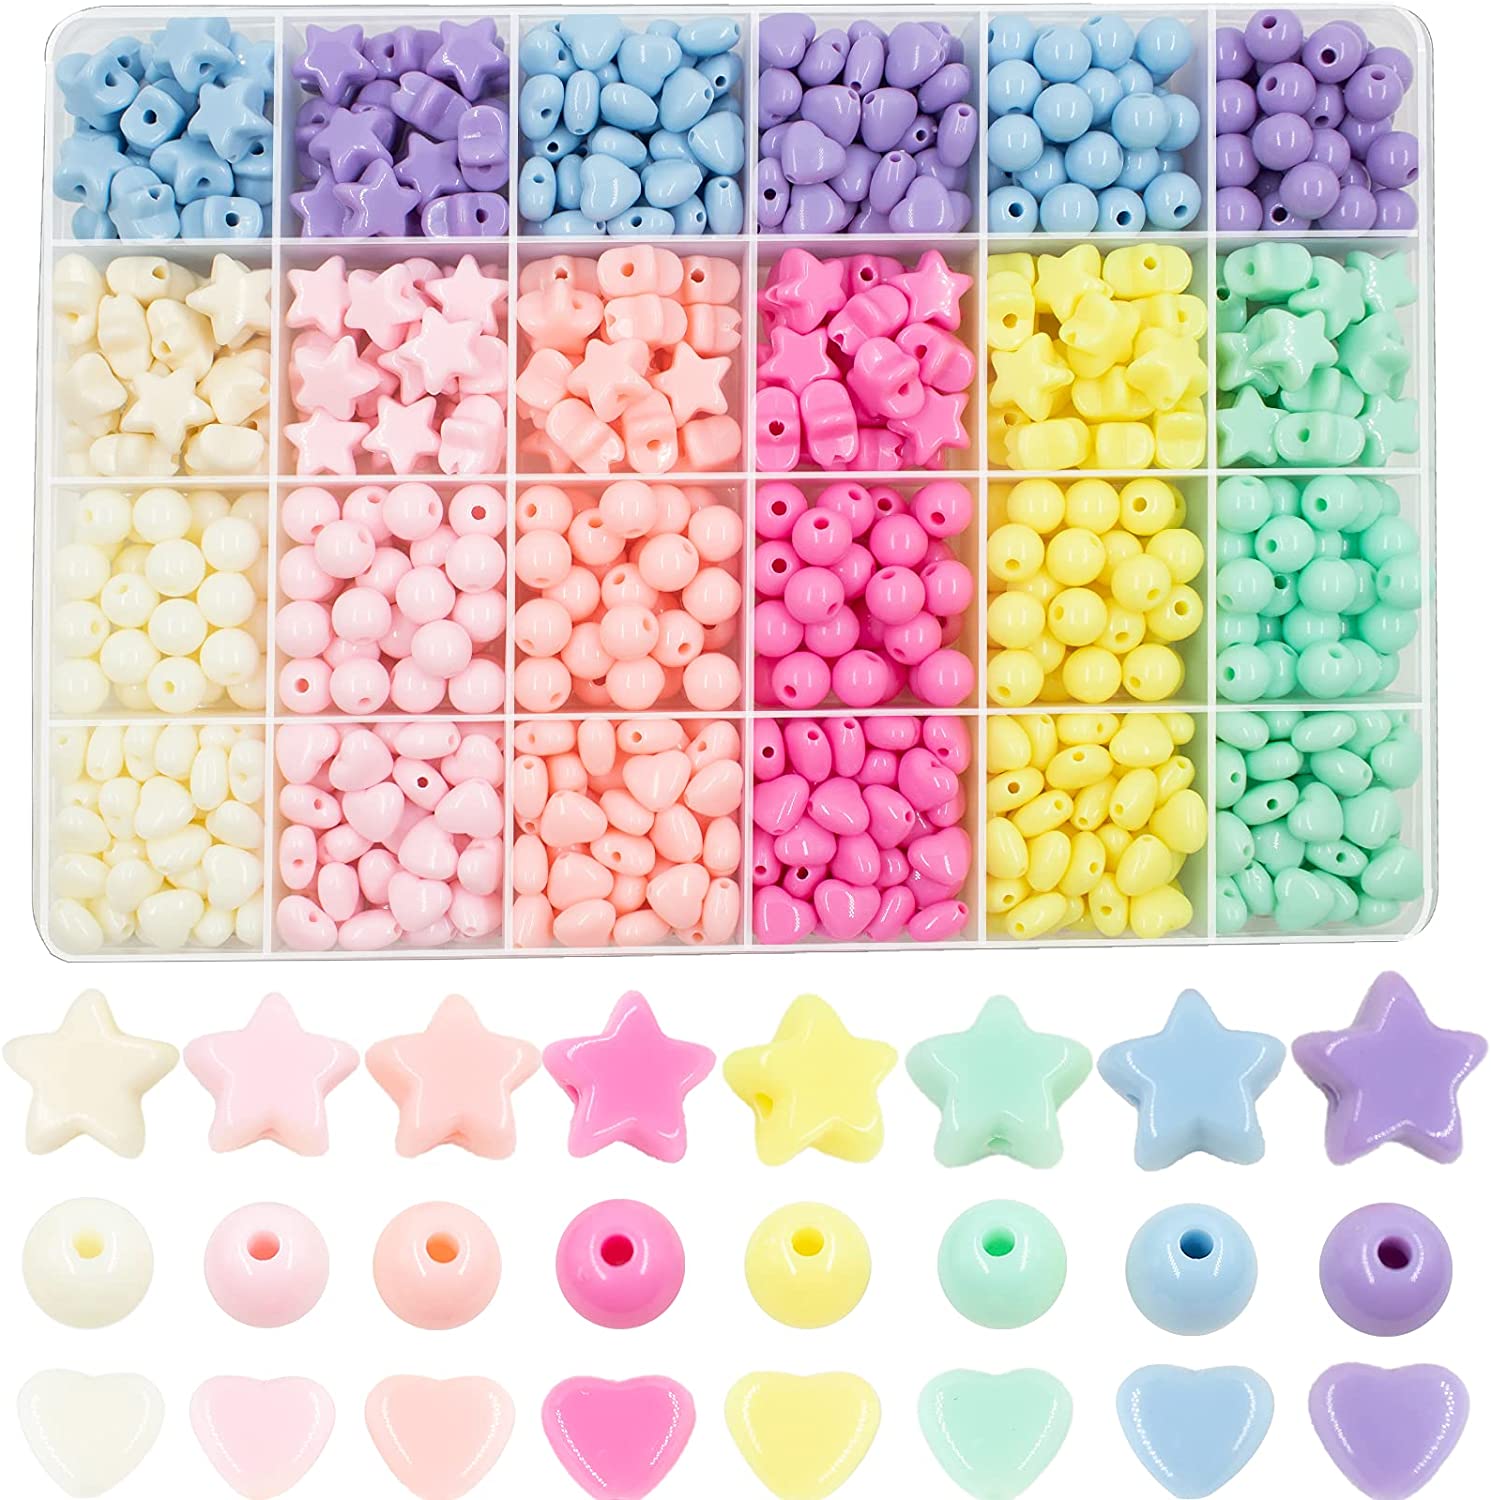 Colorful Acrylic Square Round Heart Star Elastic Hair Bands